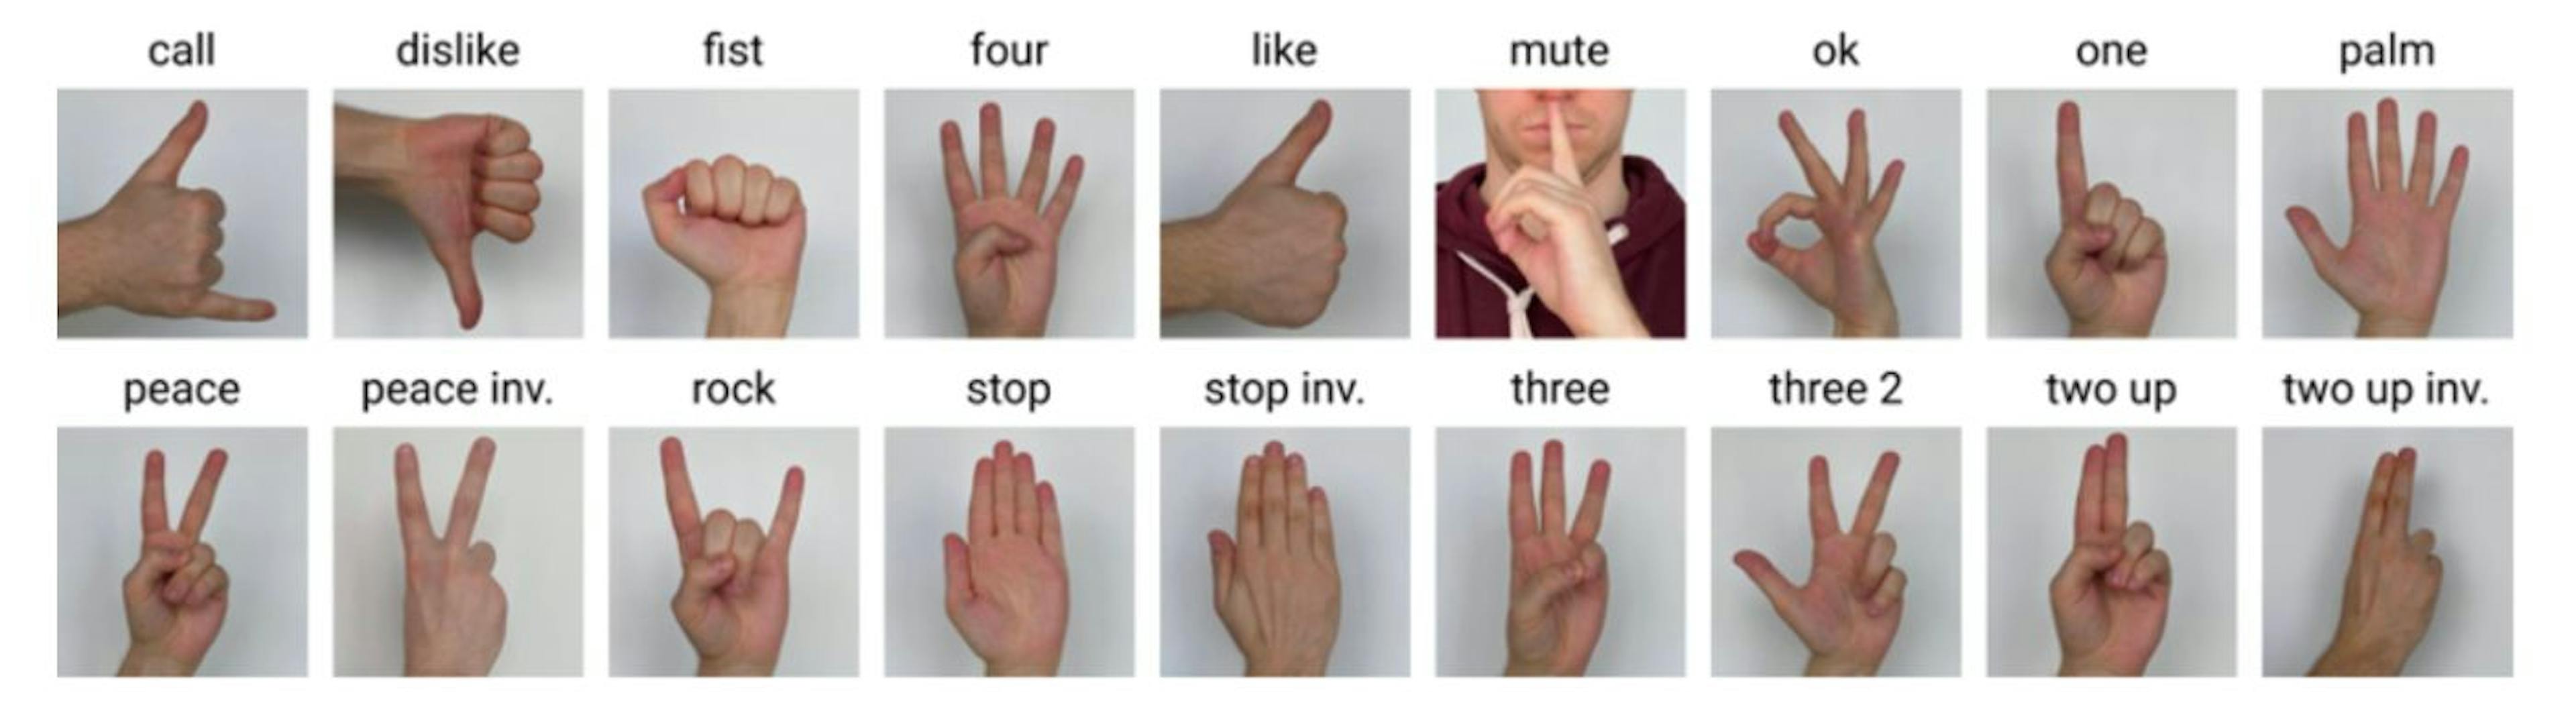 Hand gesture basket examples from the HaGRID dataset